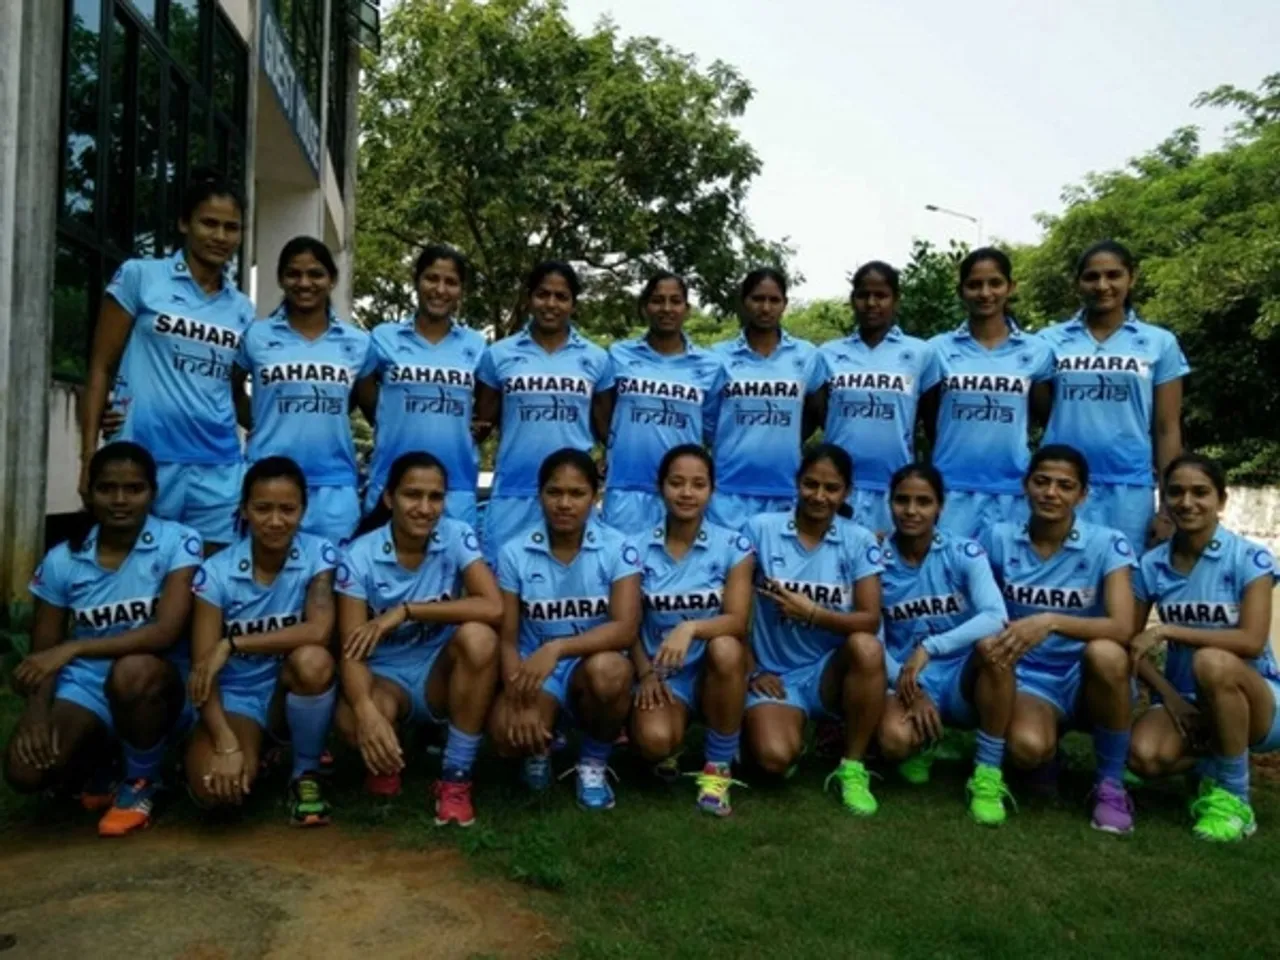 Indian women hockey players qualify Olympics first time in 36 years!